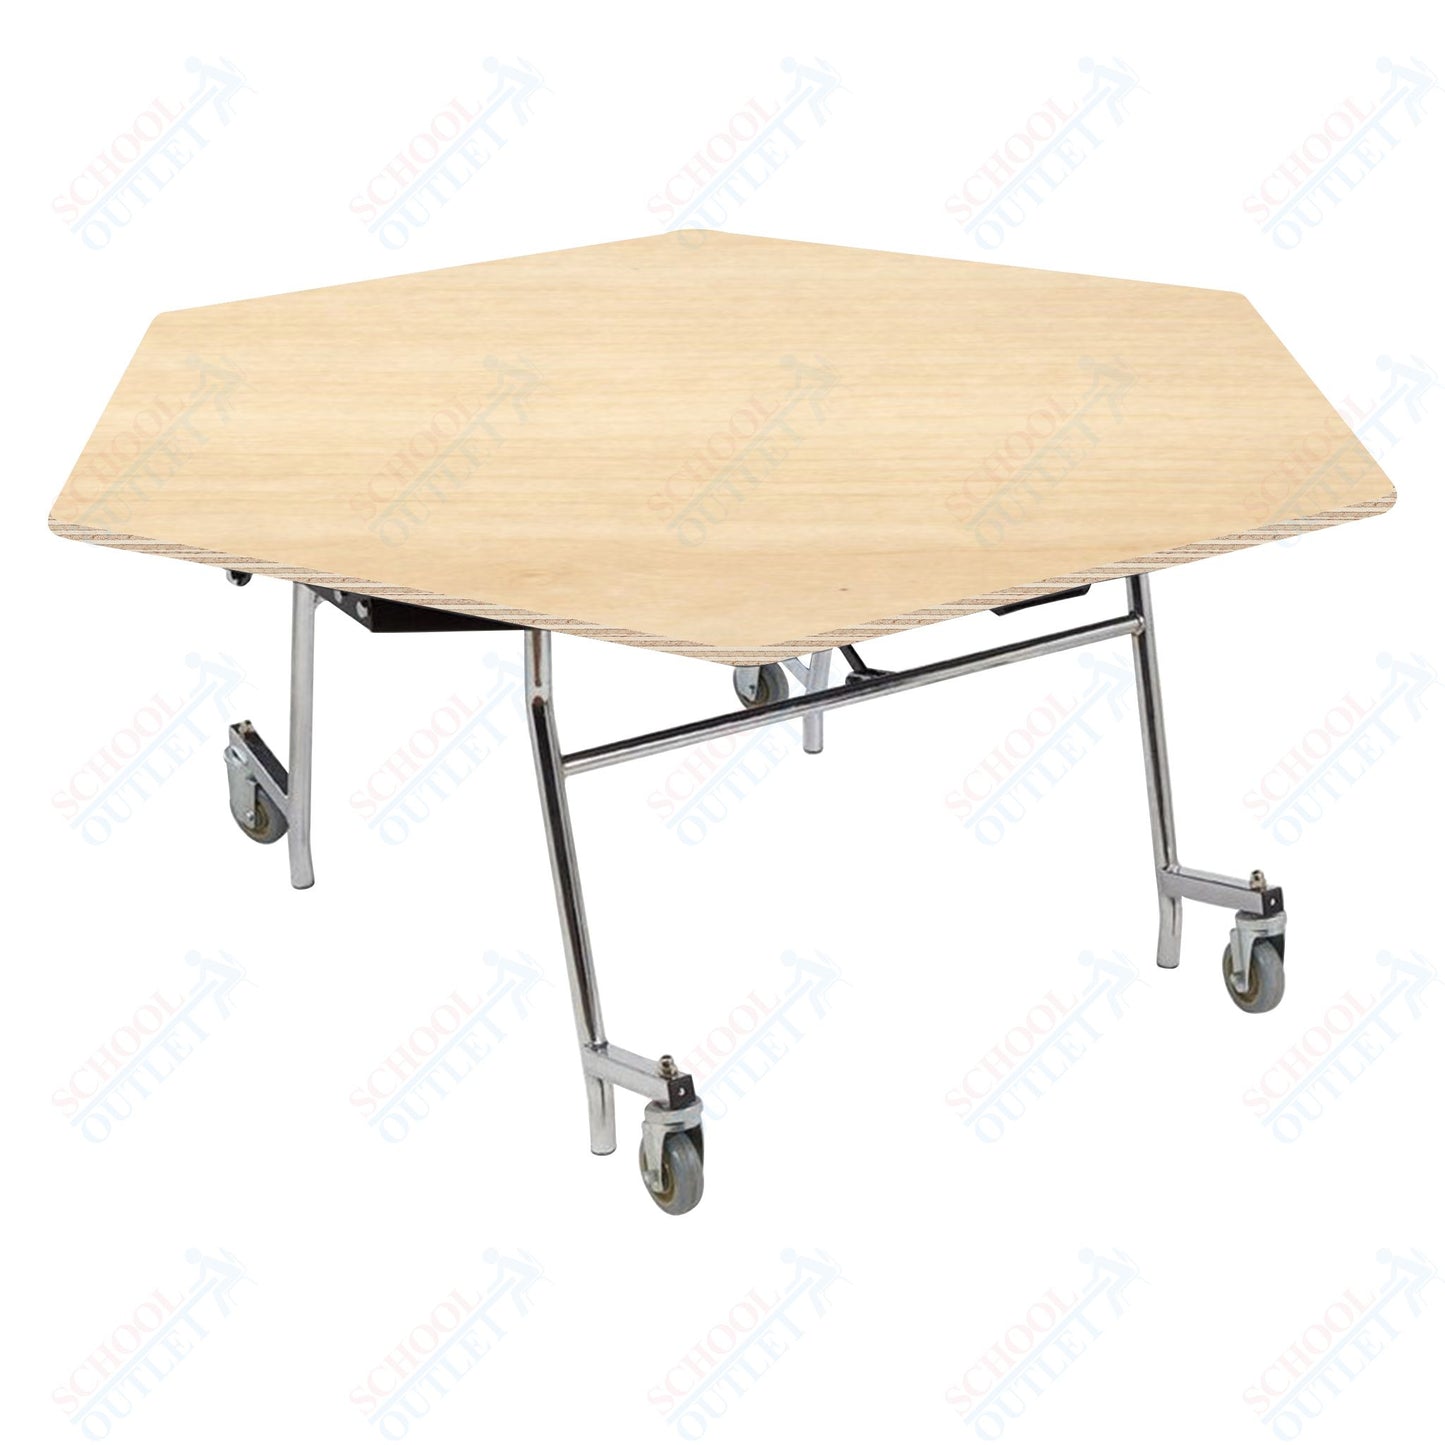 NPS EasyFold 60" Hexagon Table (National Public Seating NPS-MTSSF-60H)